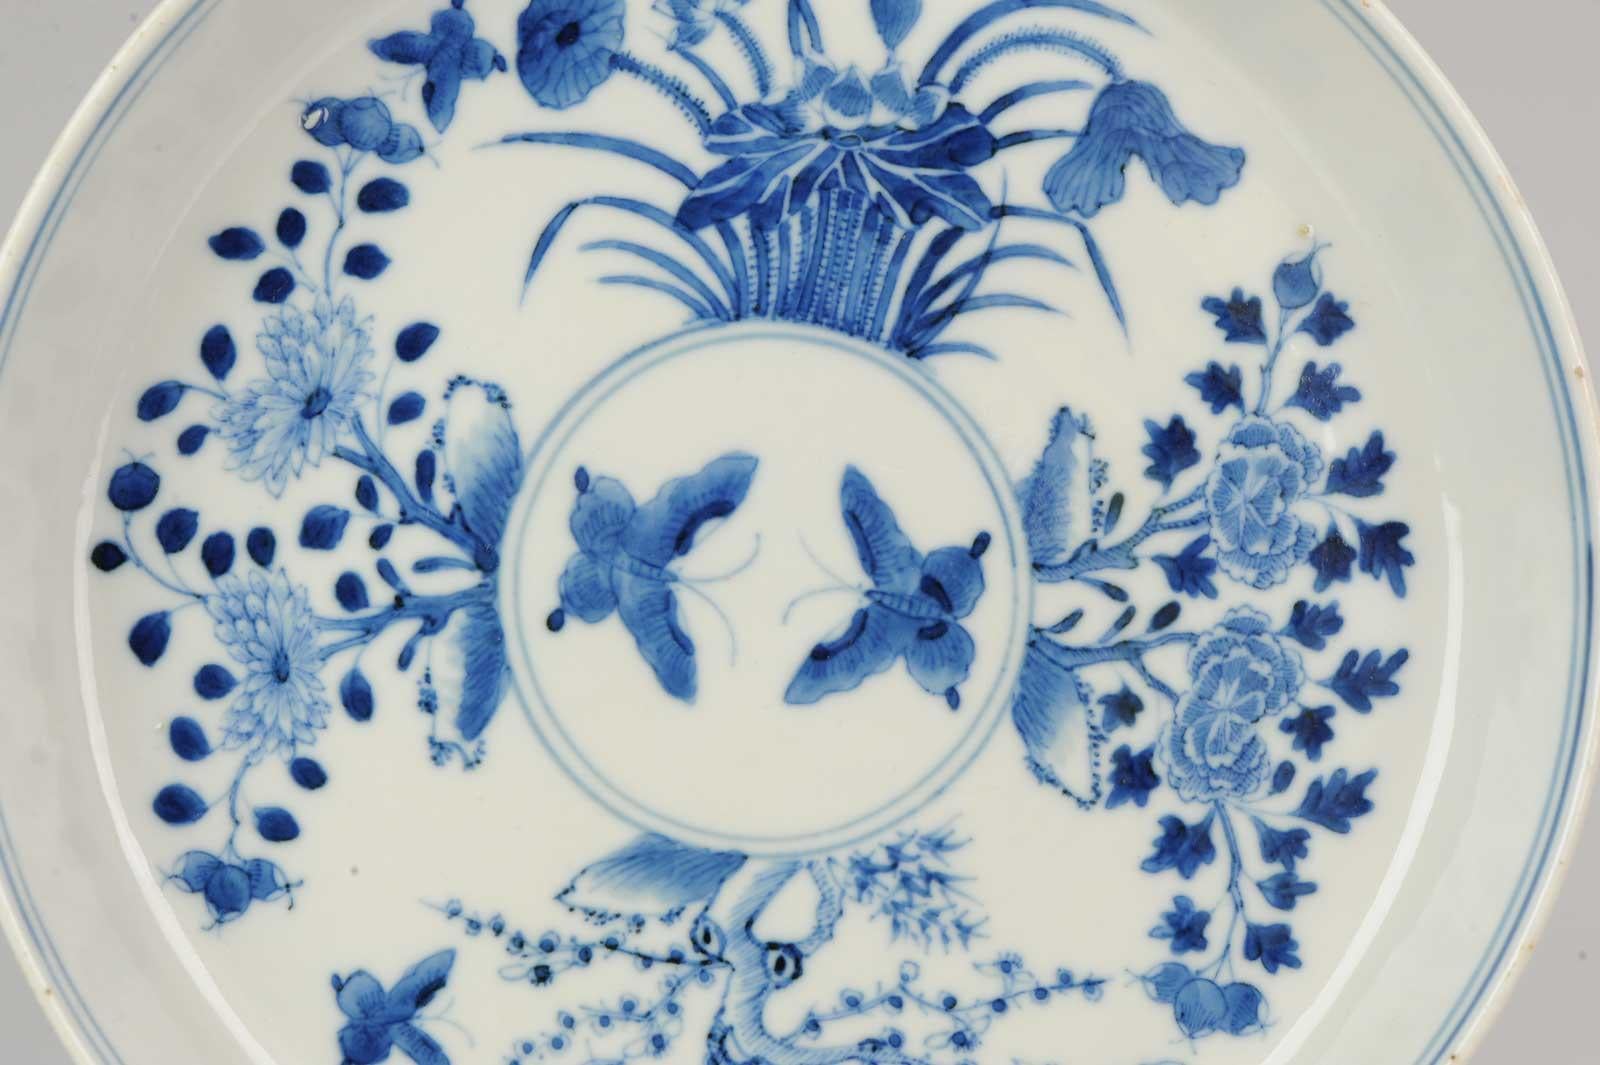 A top quality blue and white porcelain deep dish, decorated with different flowers and butterflys. Marked with 4-character mark, China, 19th century.

Pay attention to the spider web between the prunus tree.

Bleu de Hue

Chinese blue and